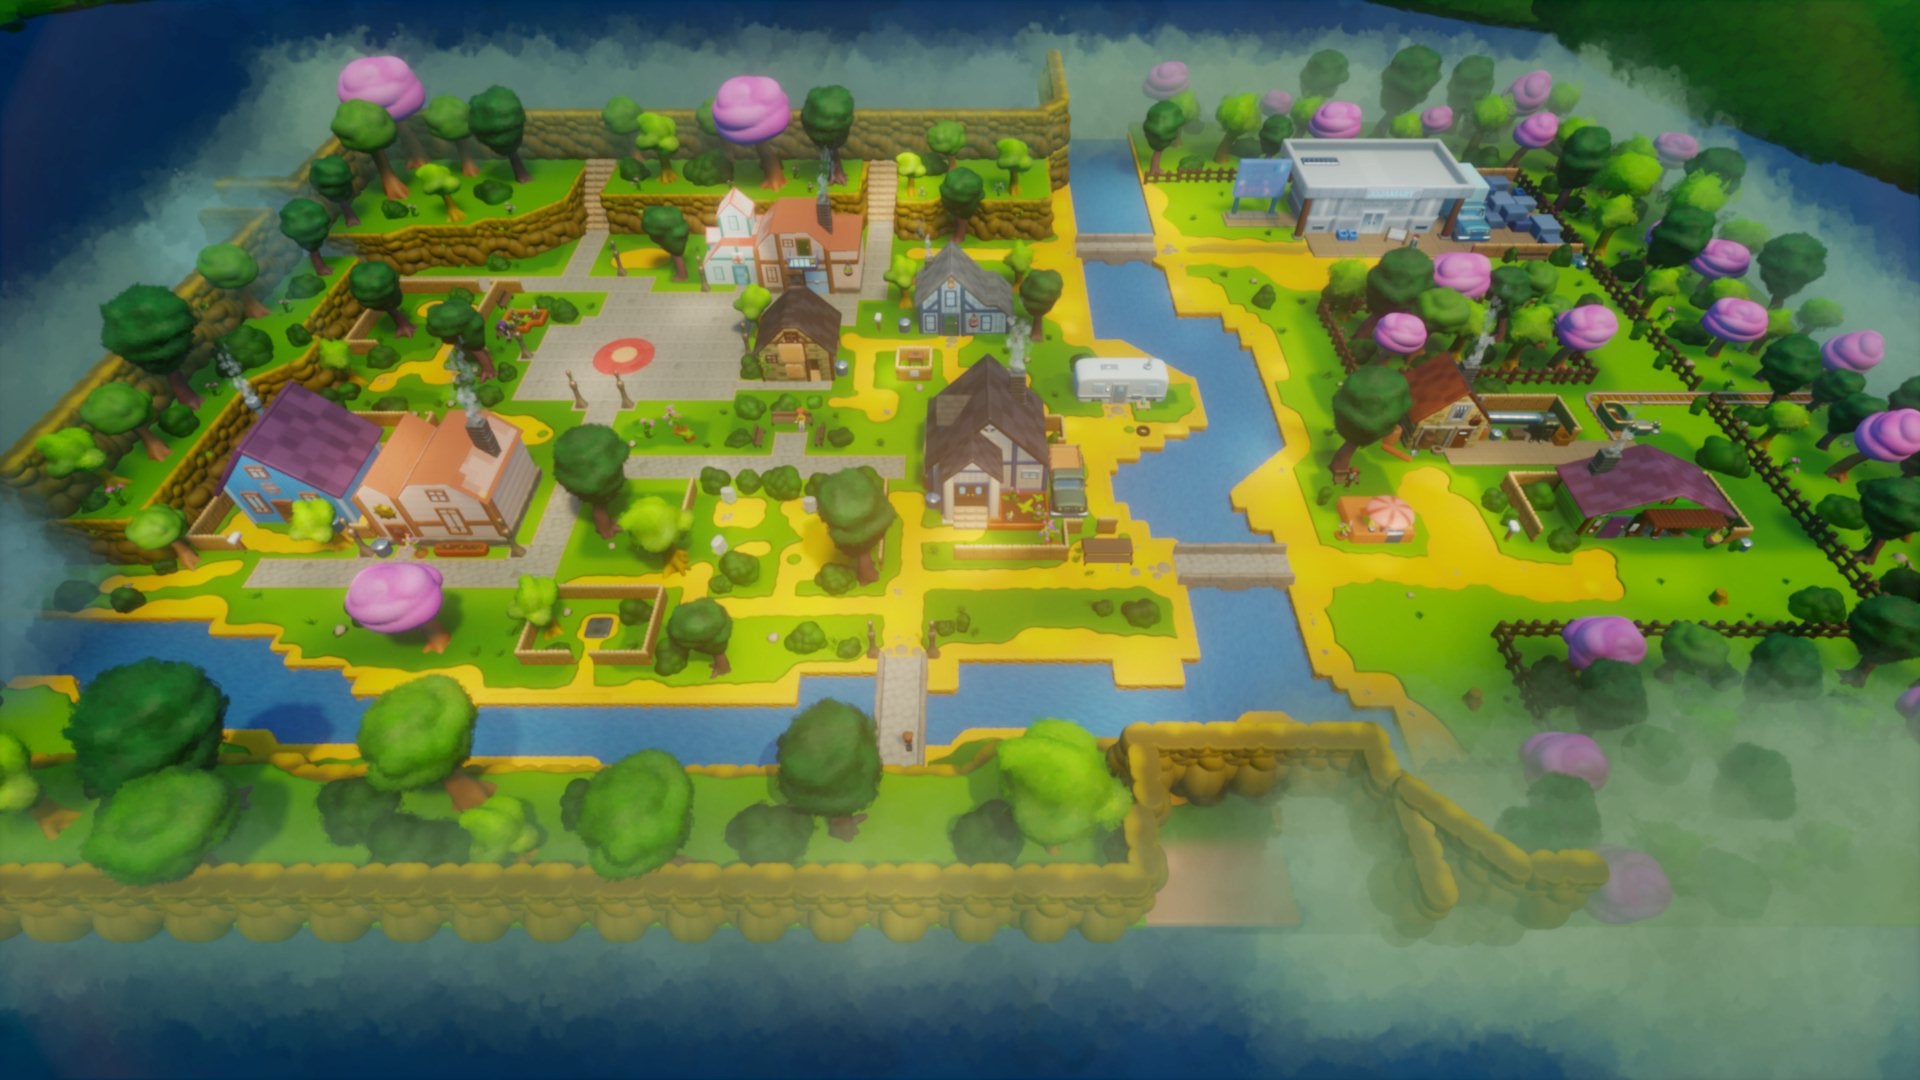 Image for Stardew Valley's Pelican Town looks lovely in 3D - created in Dreams